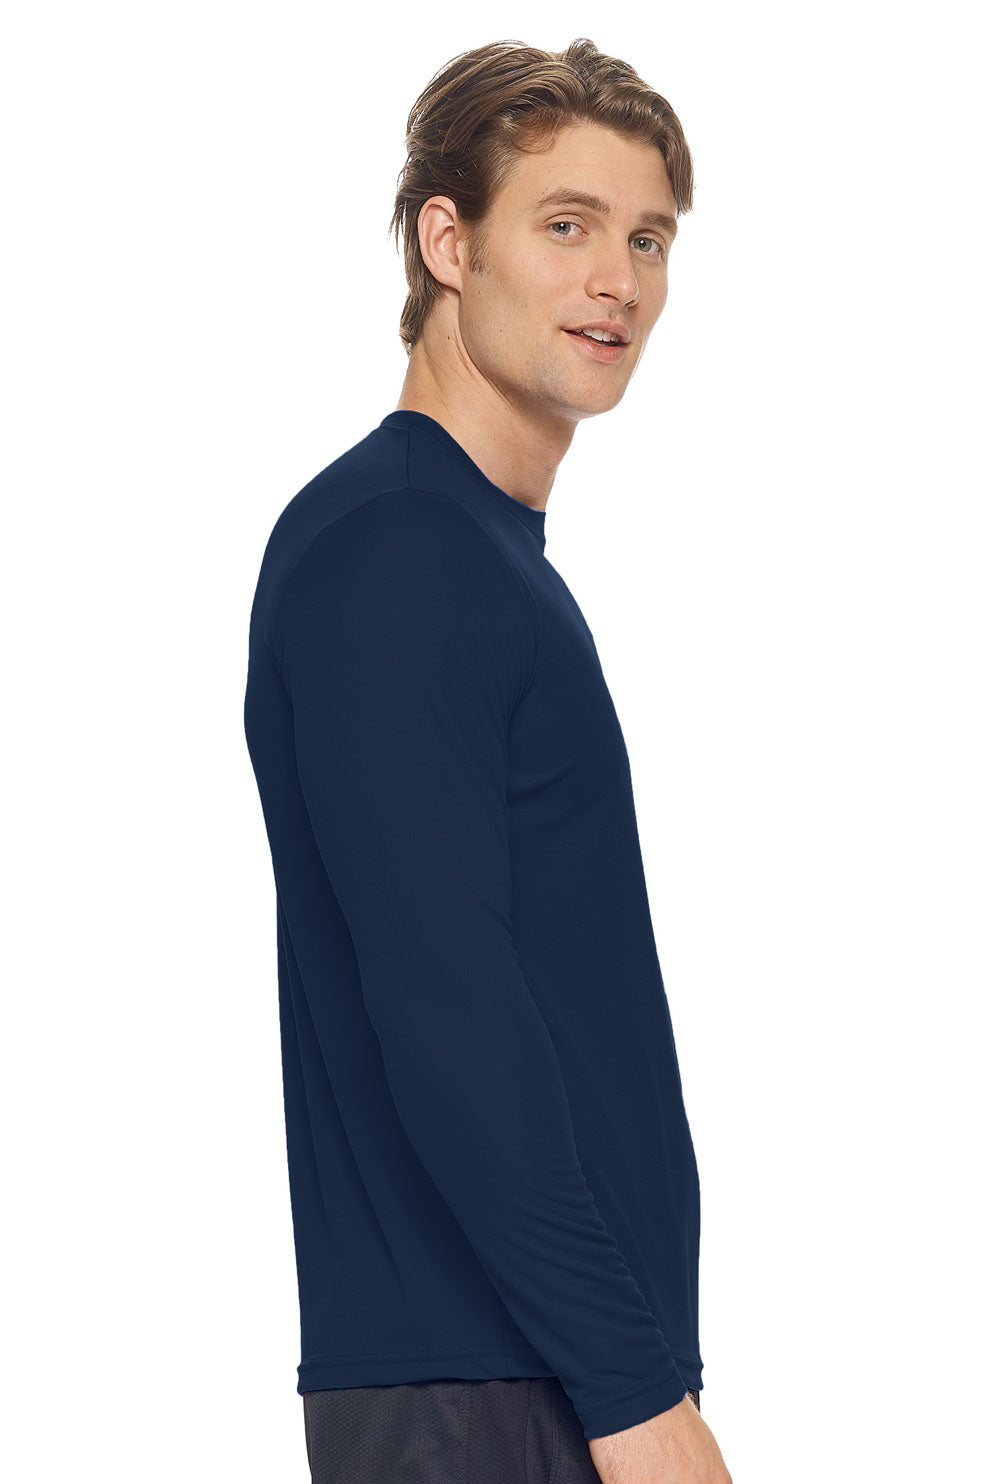 Expert Brand Wholesale Men's DriMax Crewneck Performance Long Sleeve Tee Made in USA AI901D Navy image 2#navy